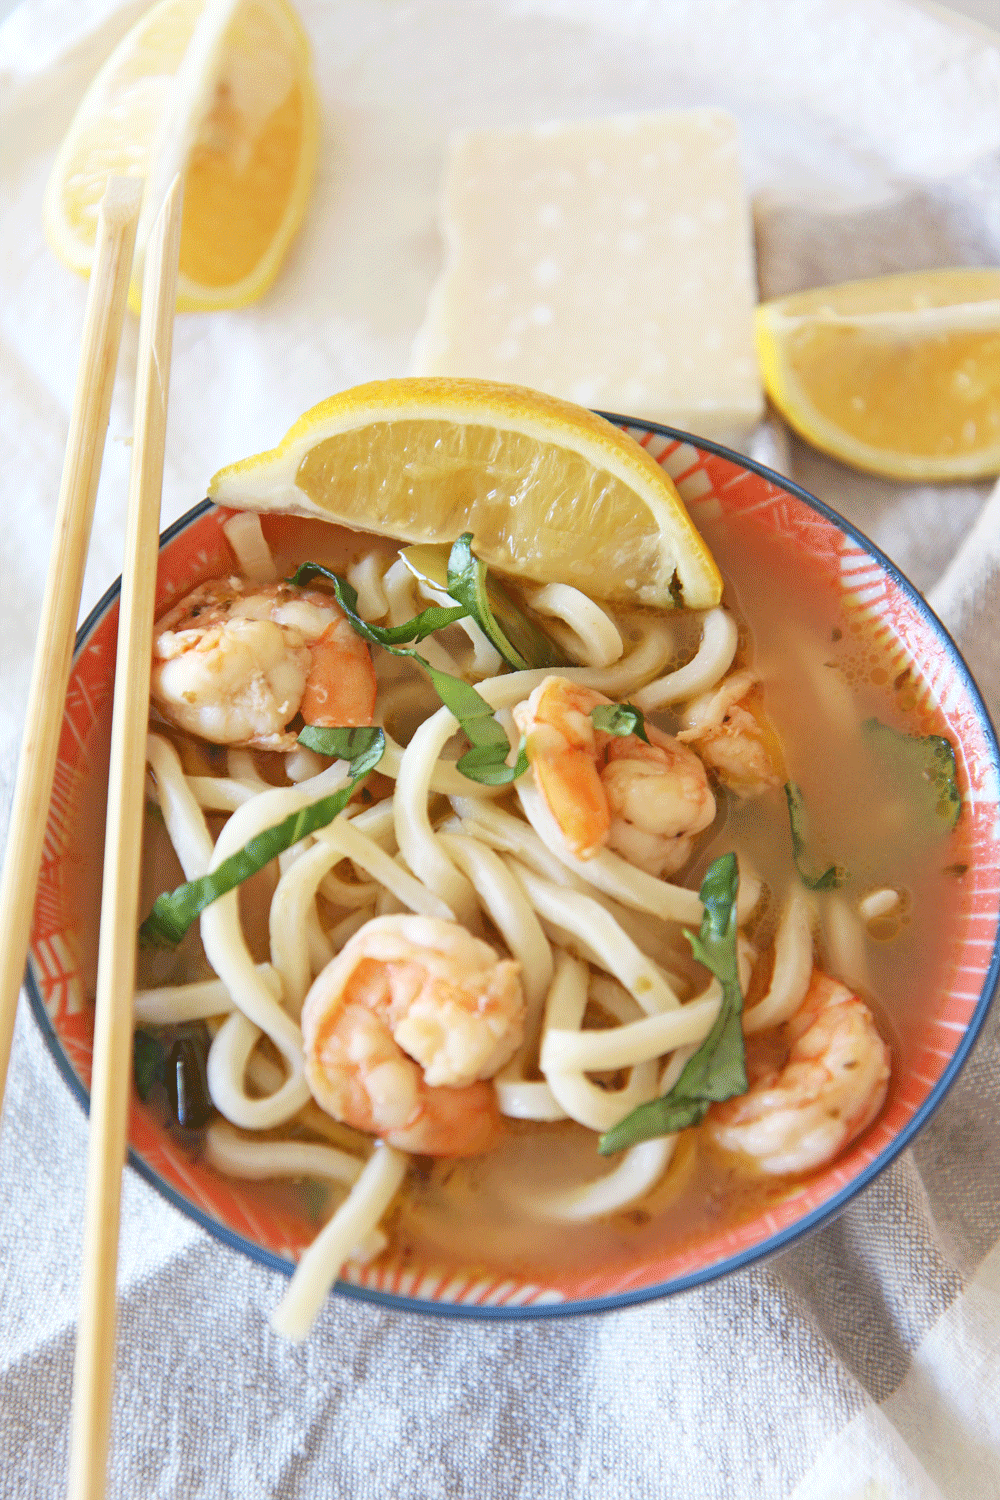 Shrimp Scampi Udon Noodle Soup Recipe. Simple 30 minute recipe that is one pot and comfort food yum. This is garlic, lemon, and chicken broth love mixed with udon noodles. Happy Cooking! www.ChopHappy.com #noodlesoup #shrimpscampi